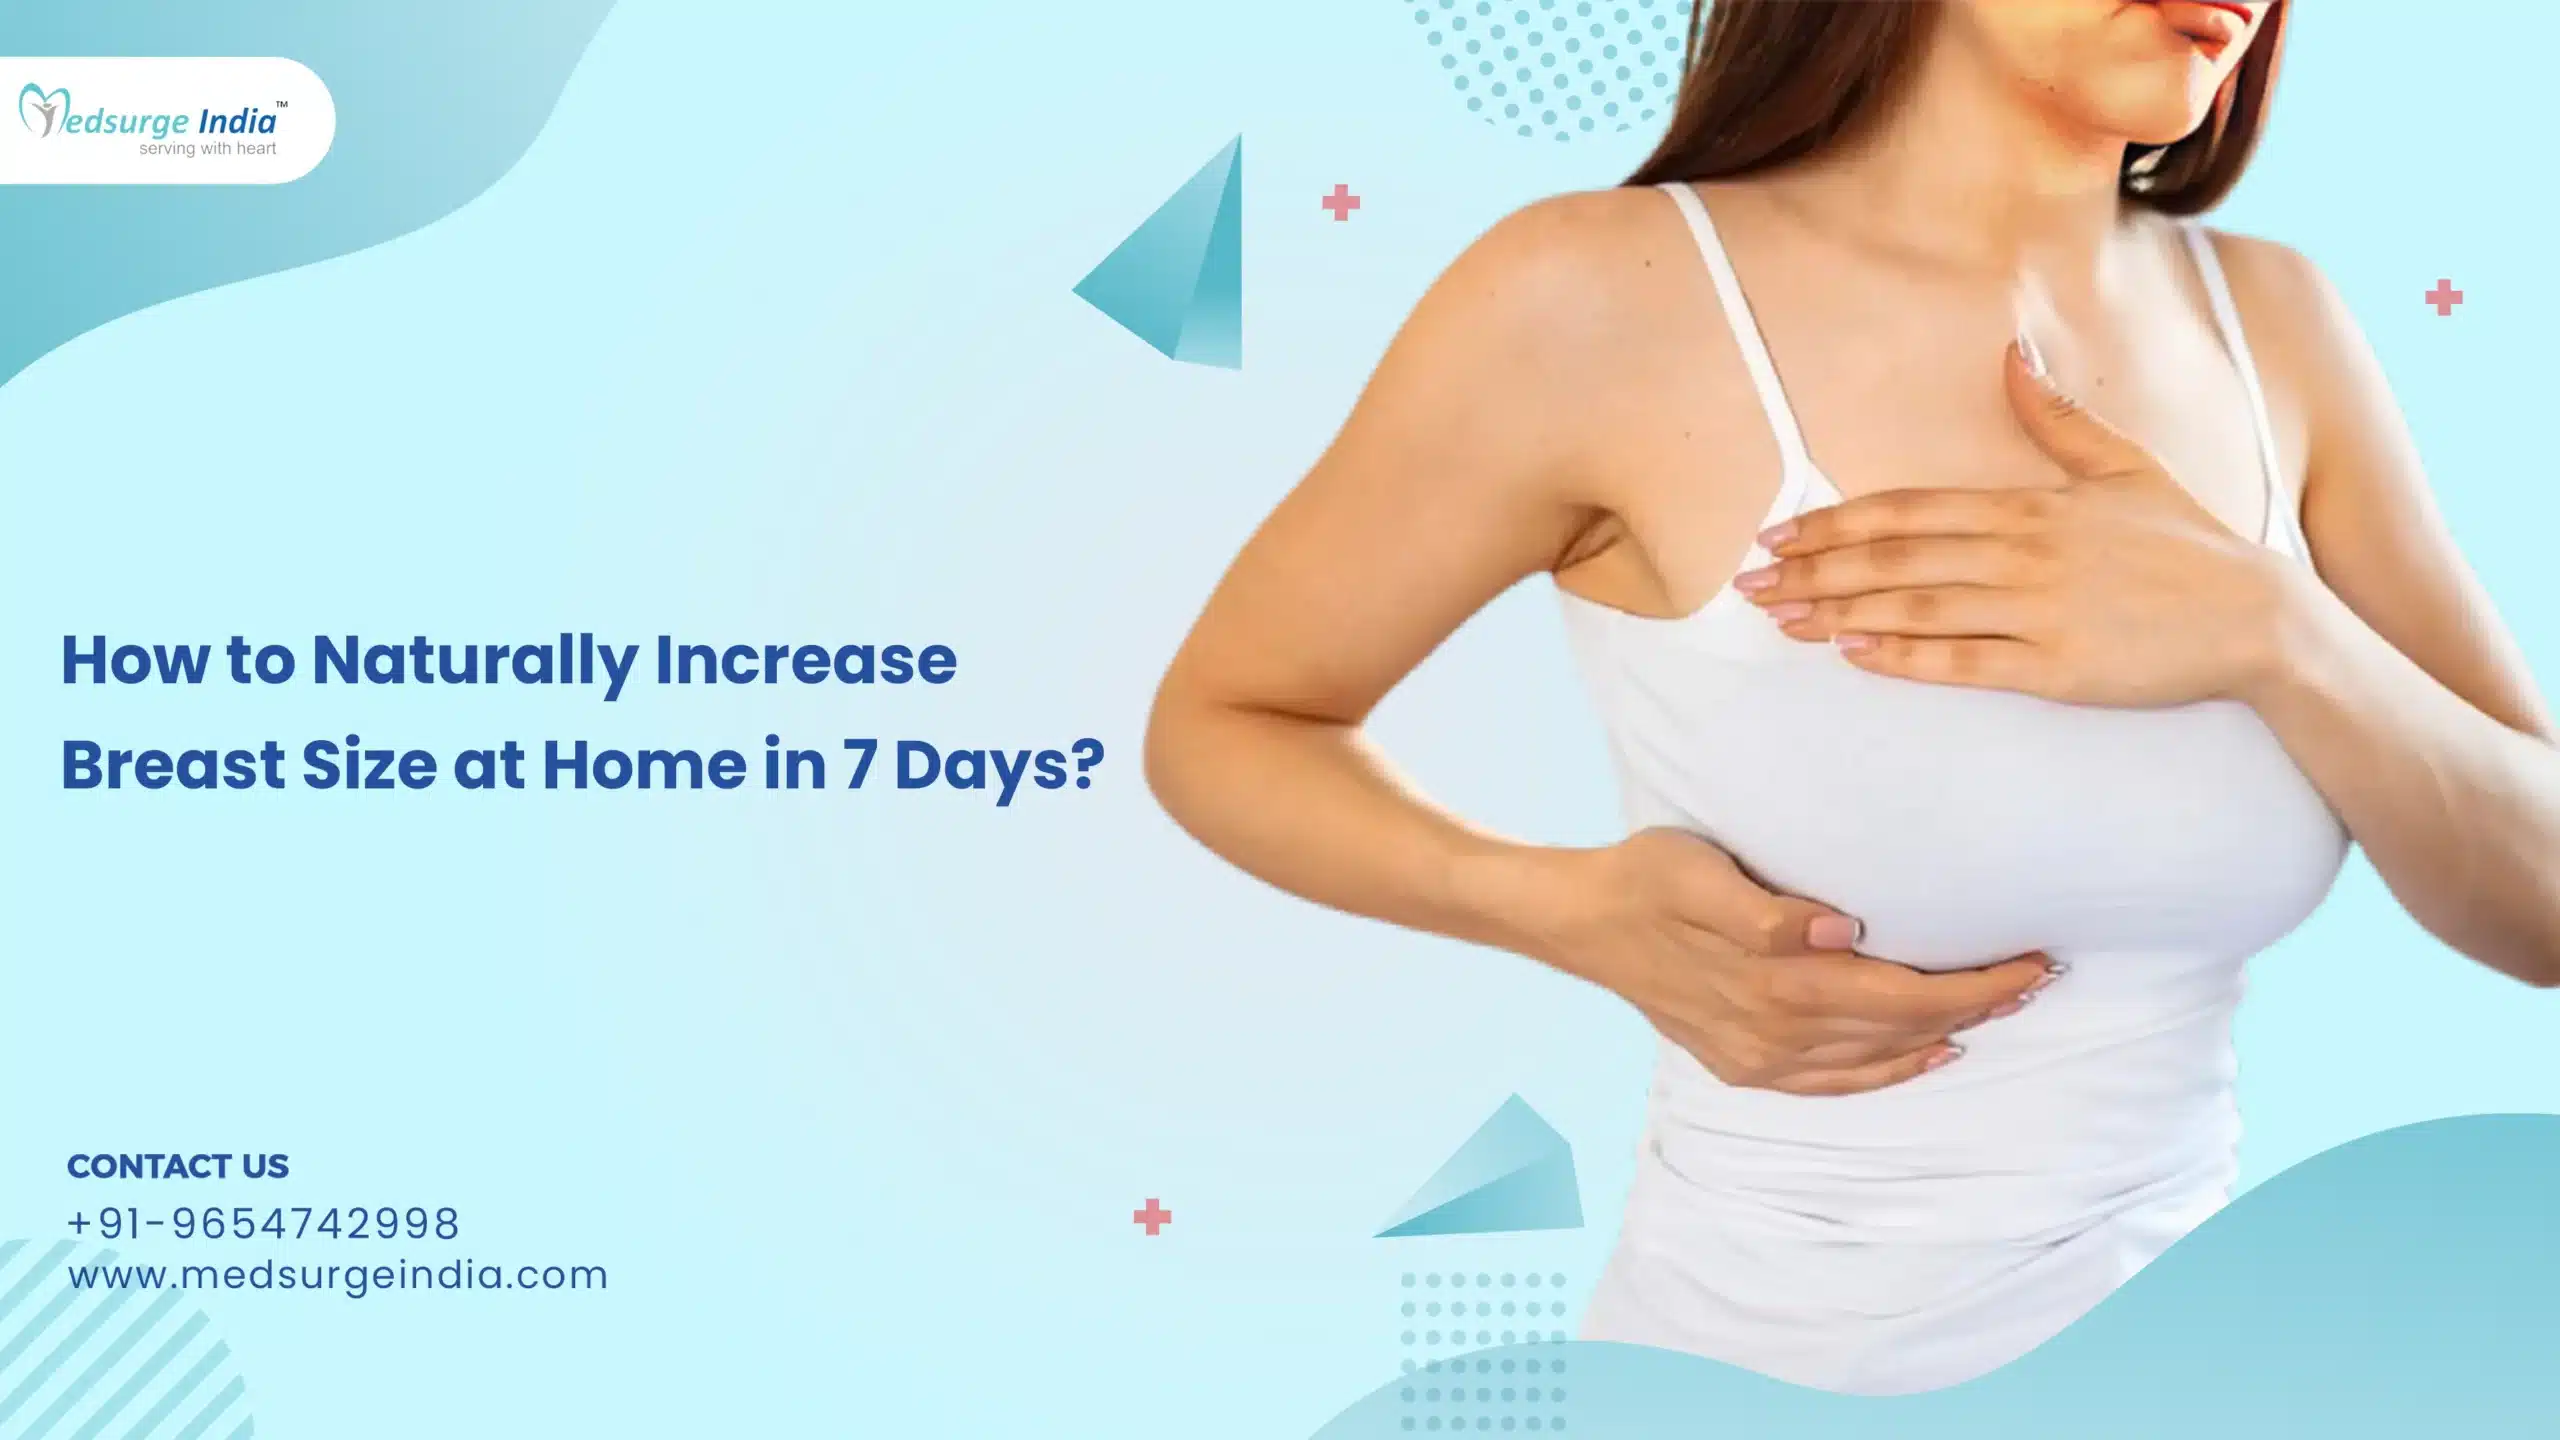 How to Naturally Increase Breast Size at Home in 7 Days?